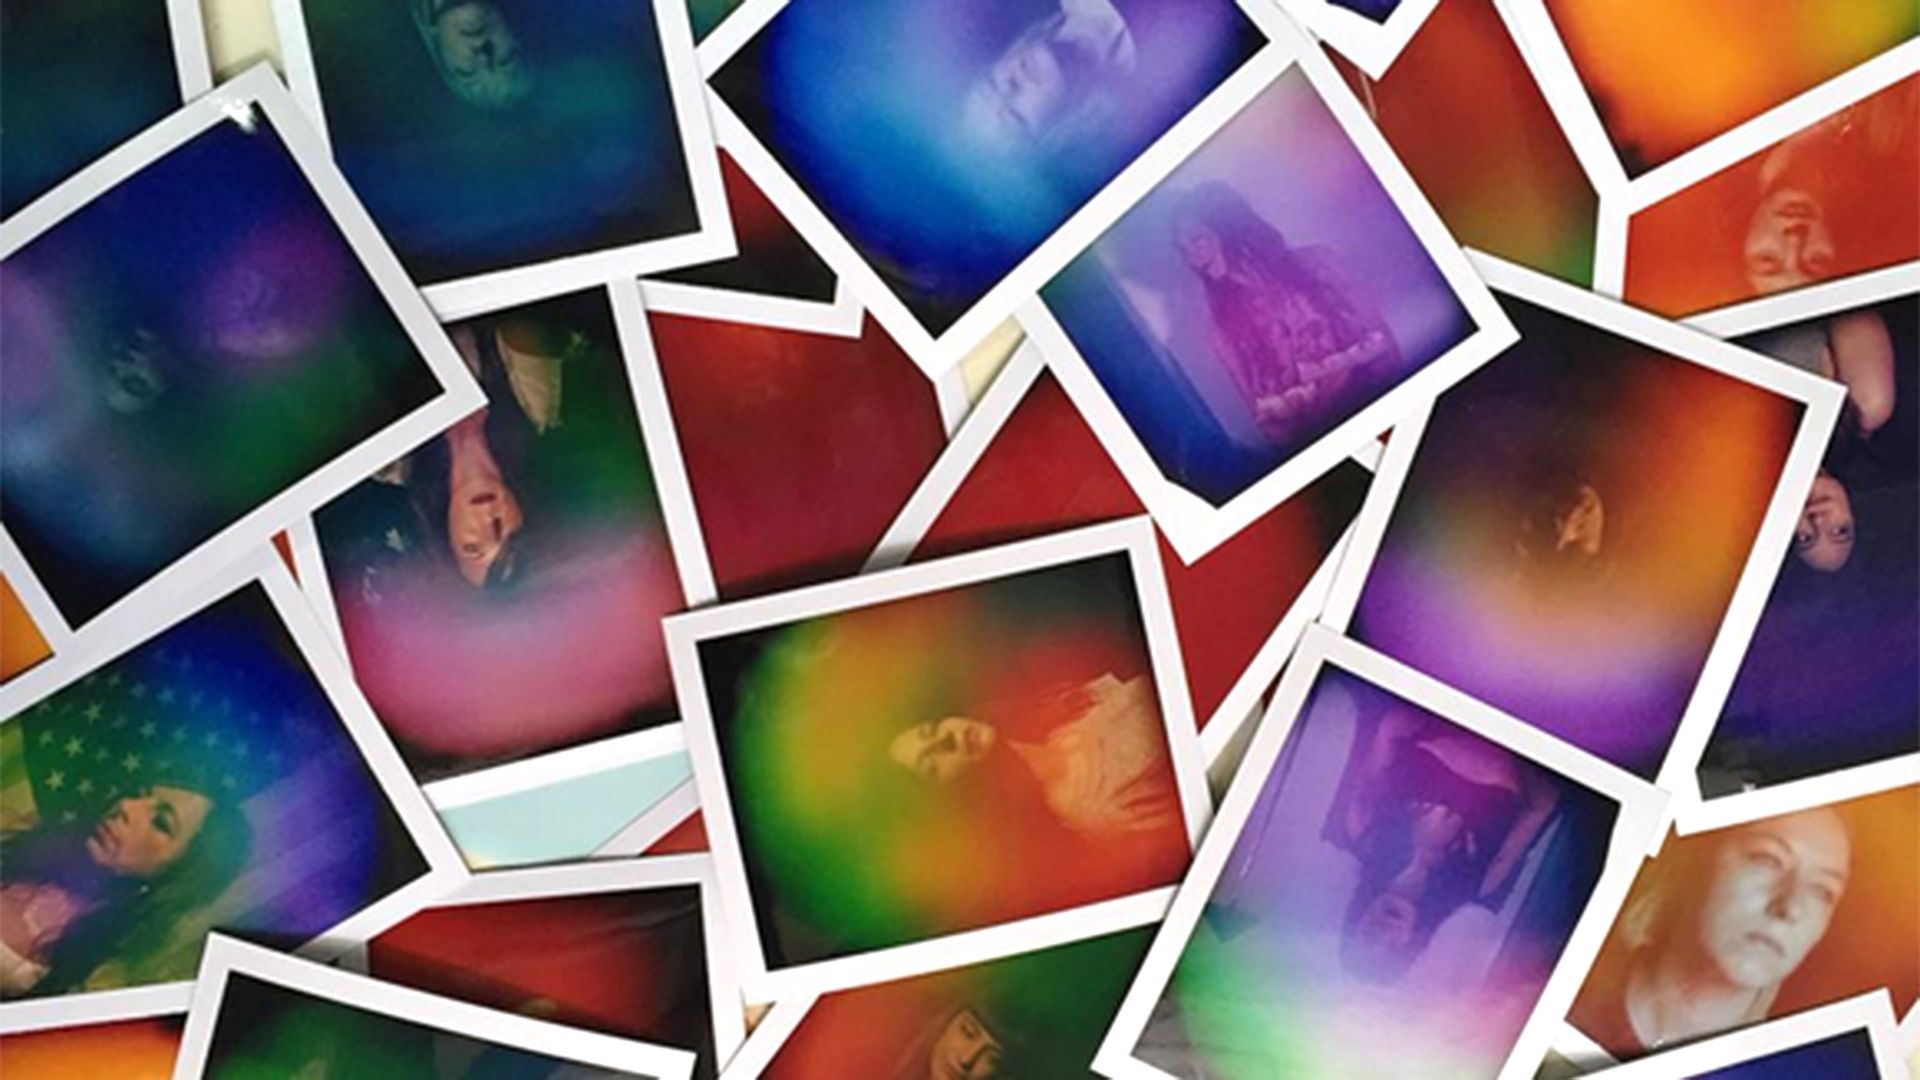 Aura photography is the new spiritual trend